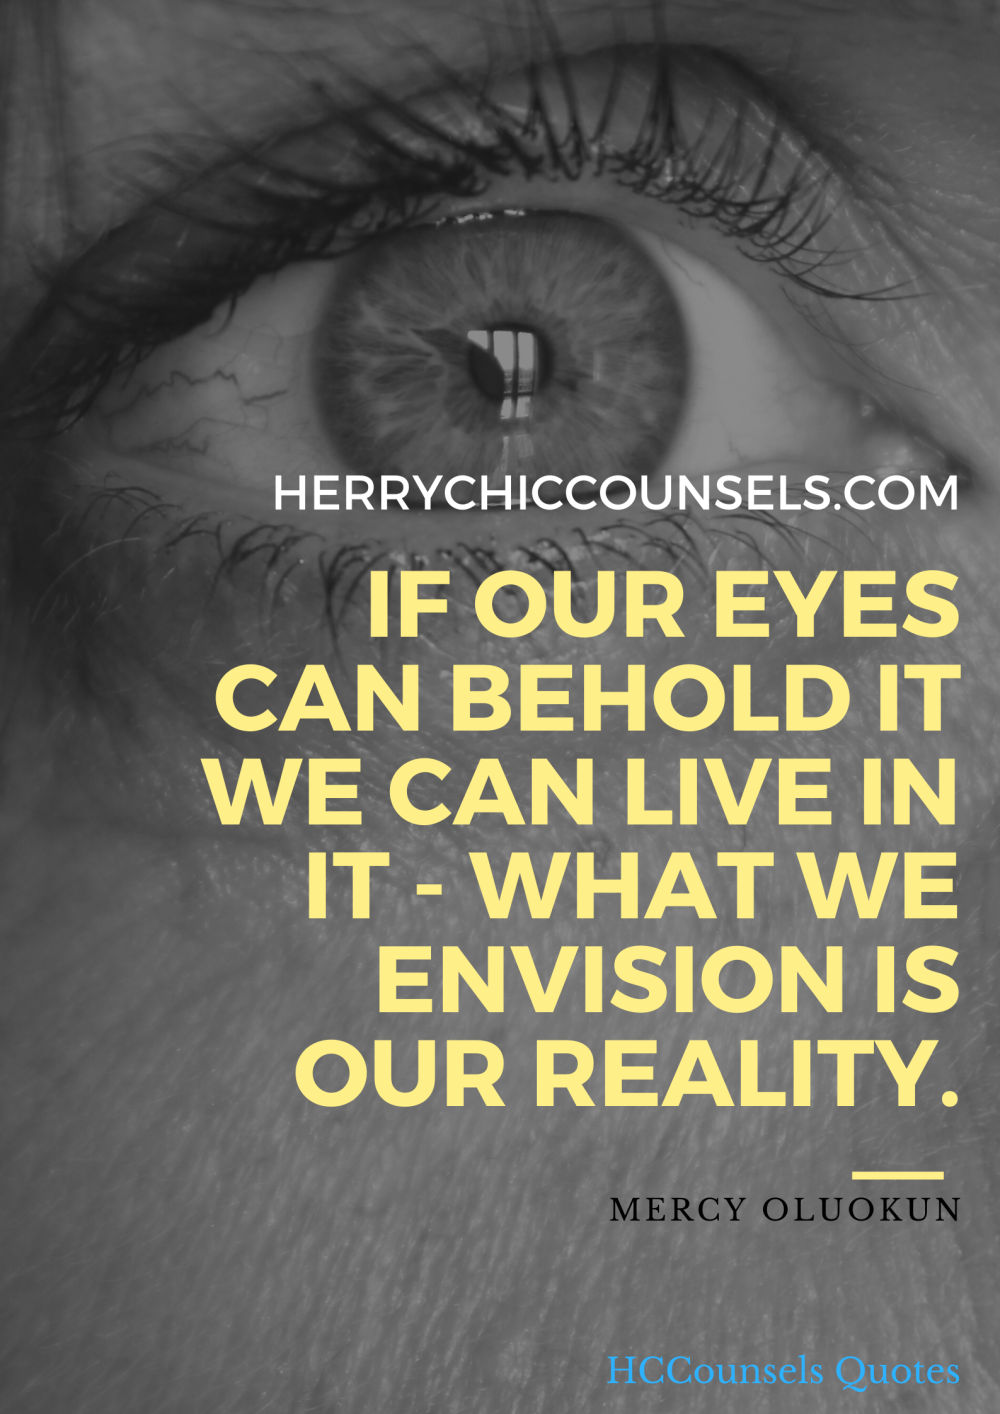 What we envision is our reality